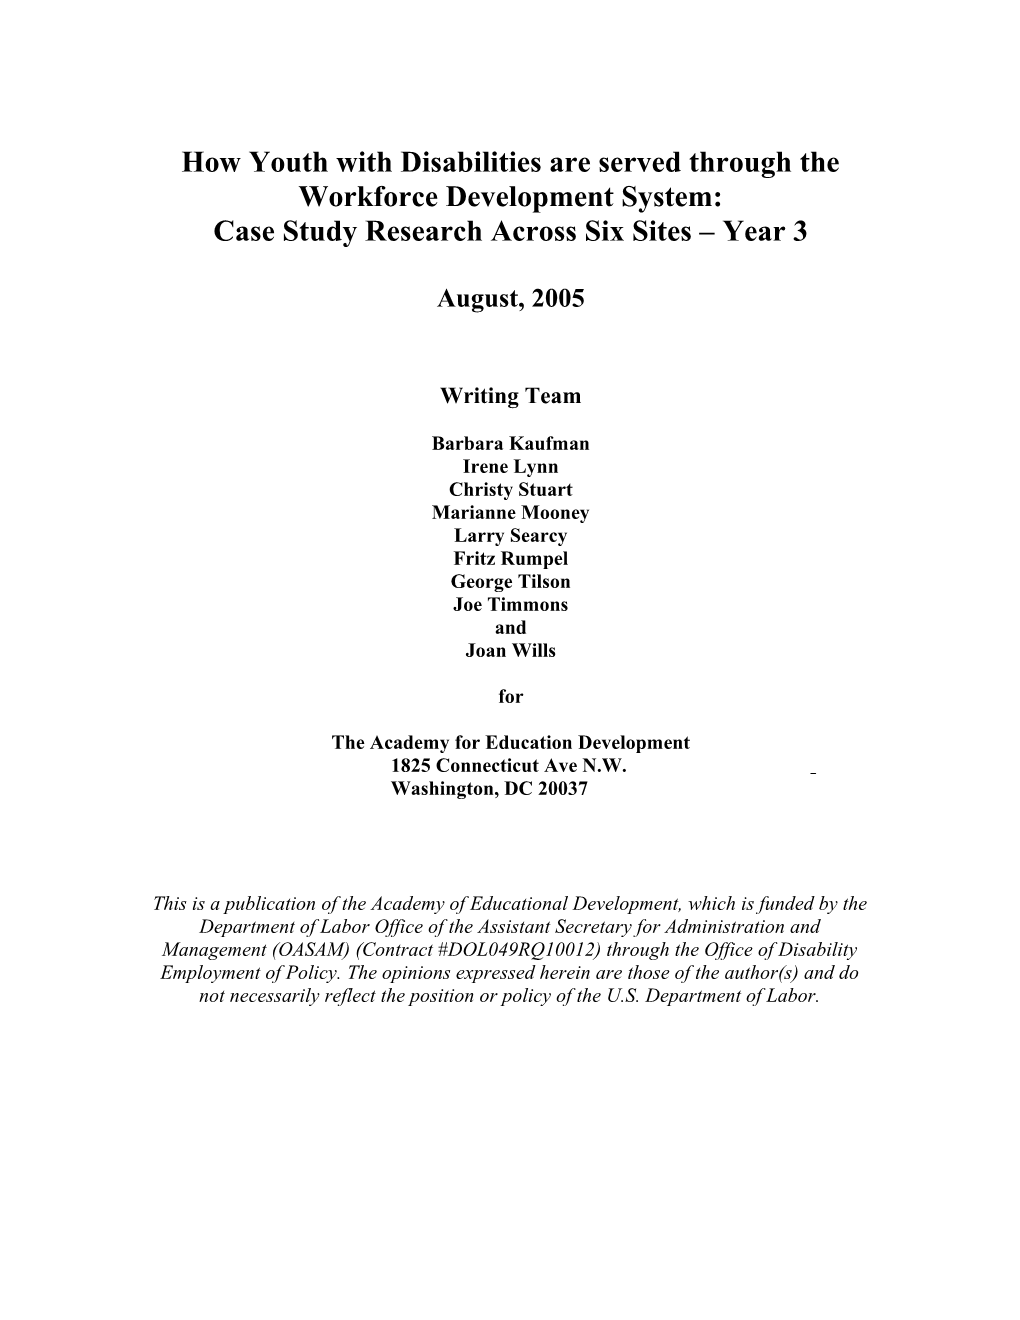 How Youth with Disabilities Are Served Through the Workforce Development System